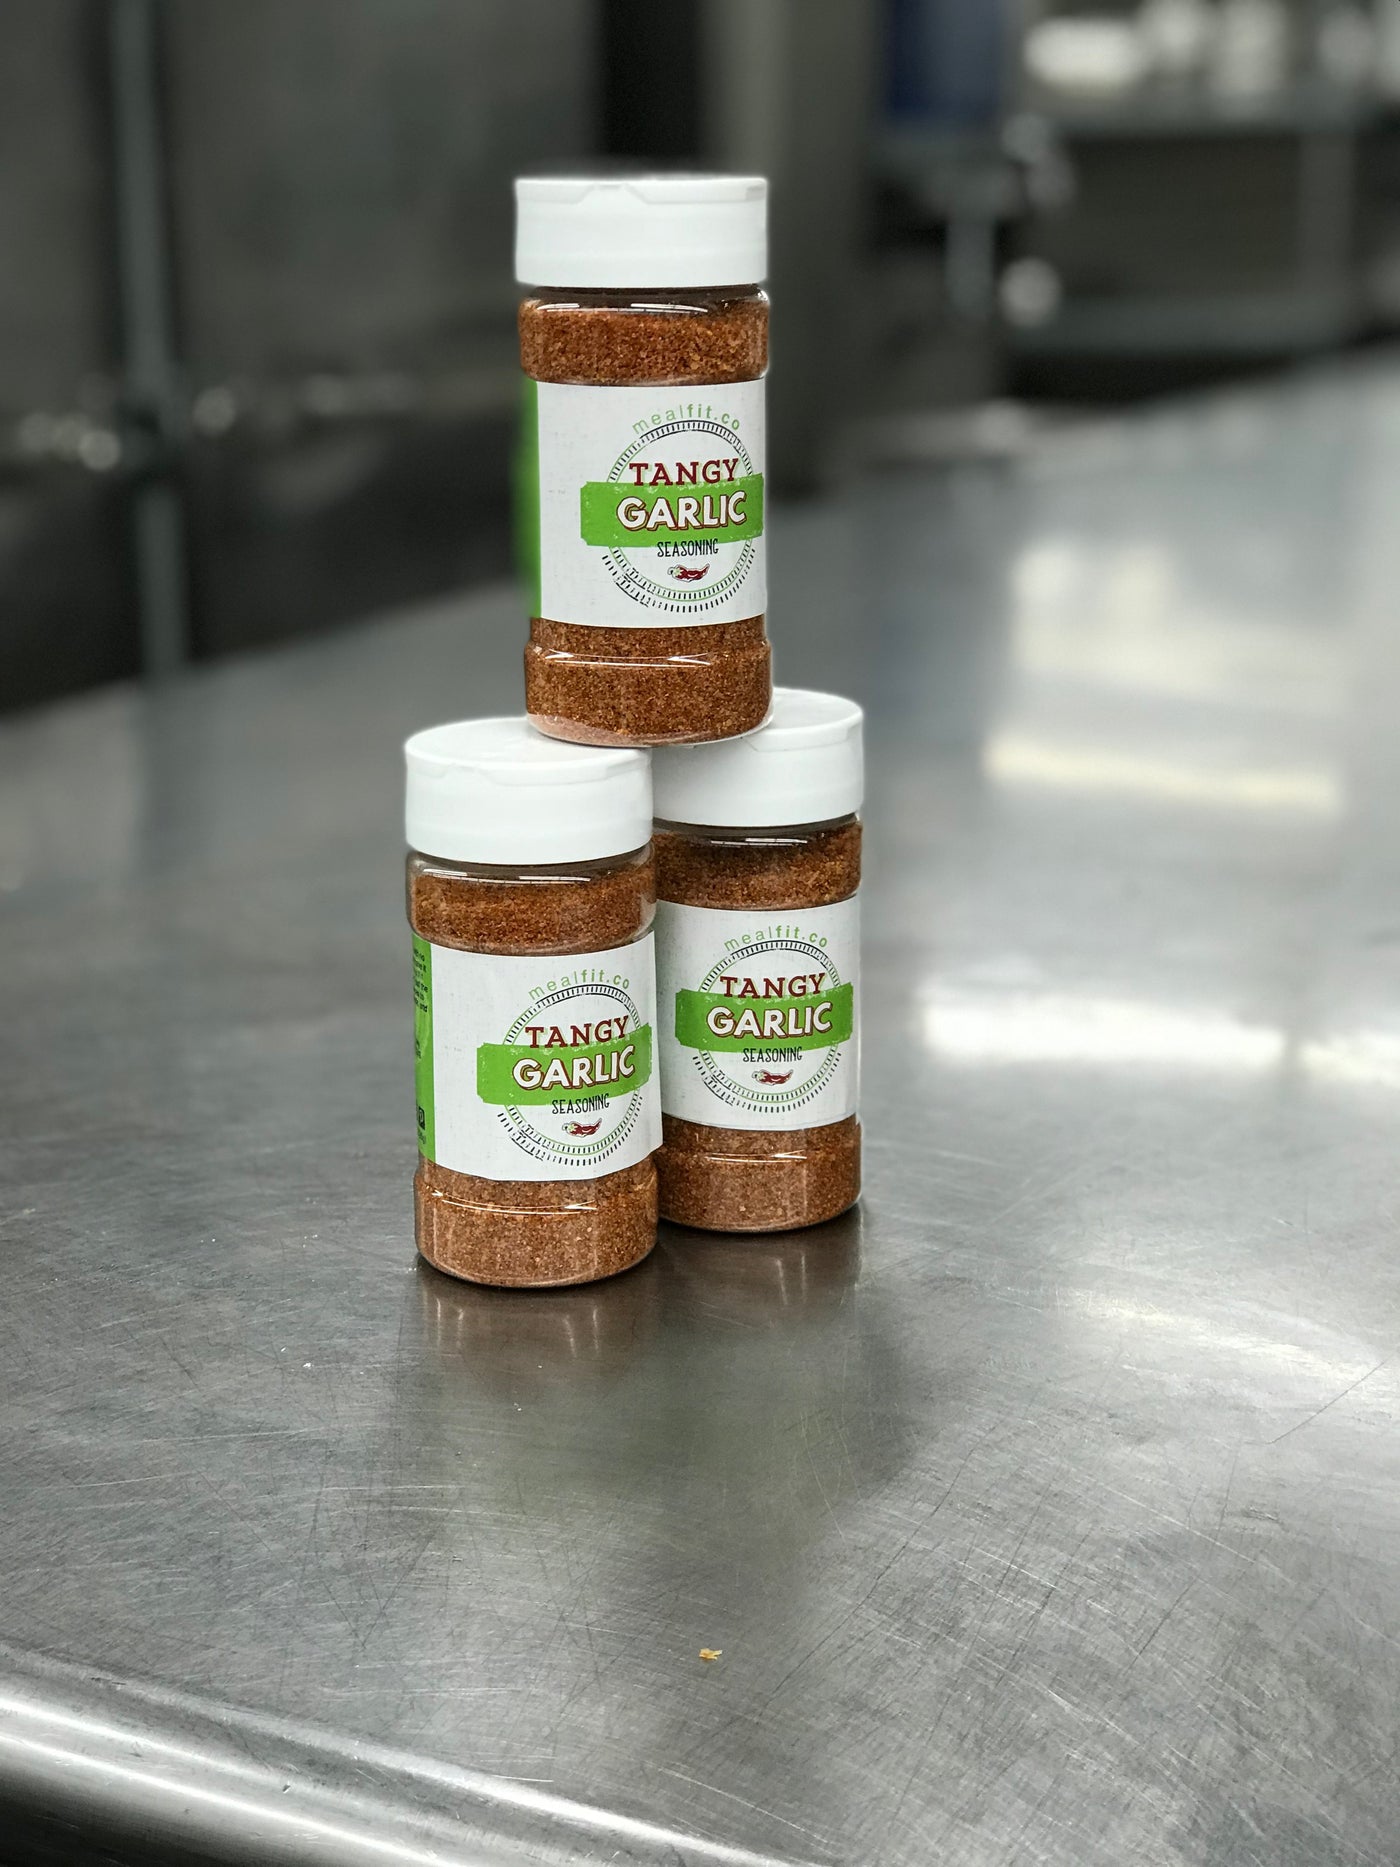 Now Available - mealfit Tangy Garlic Seasoning